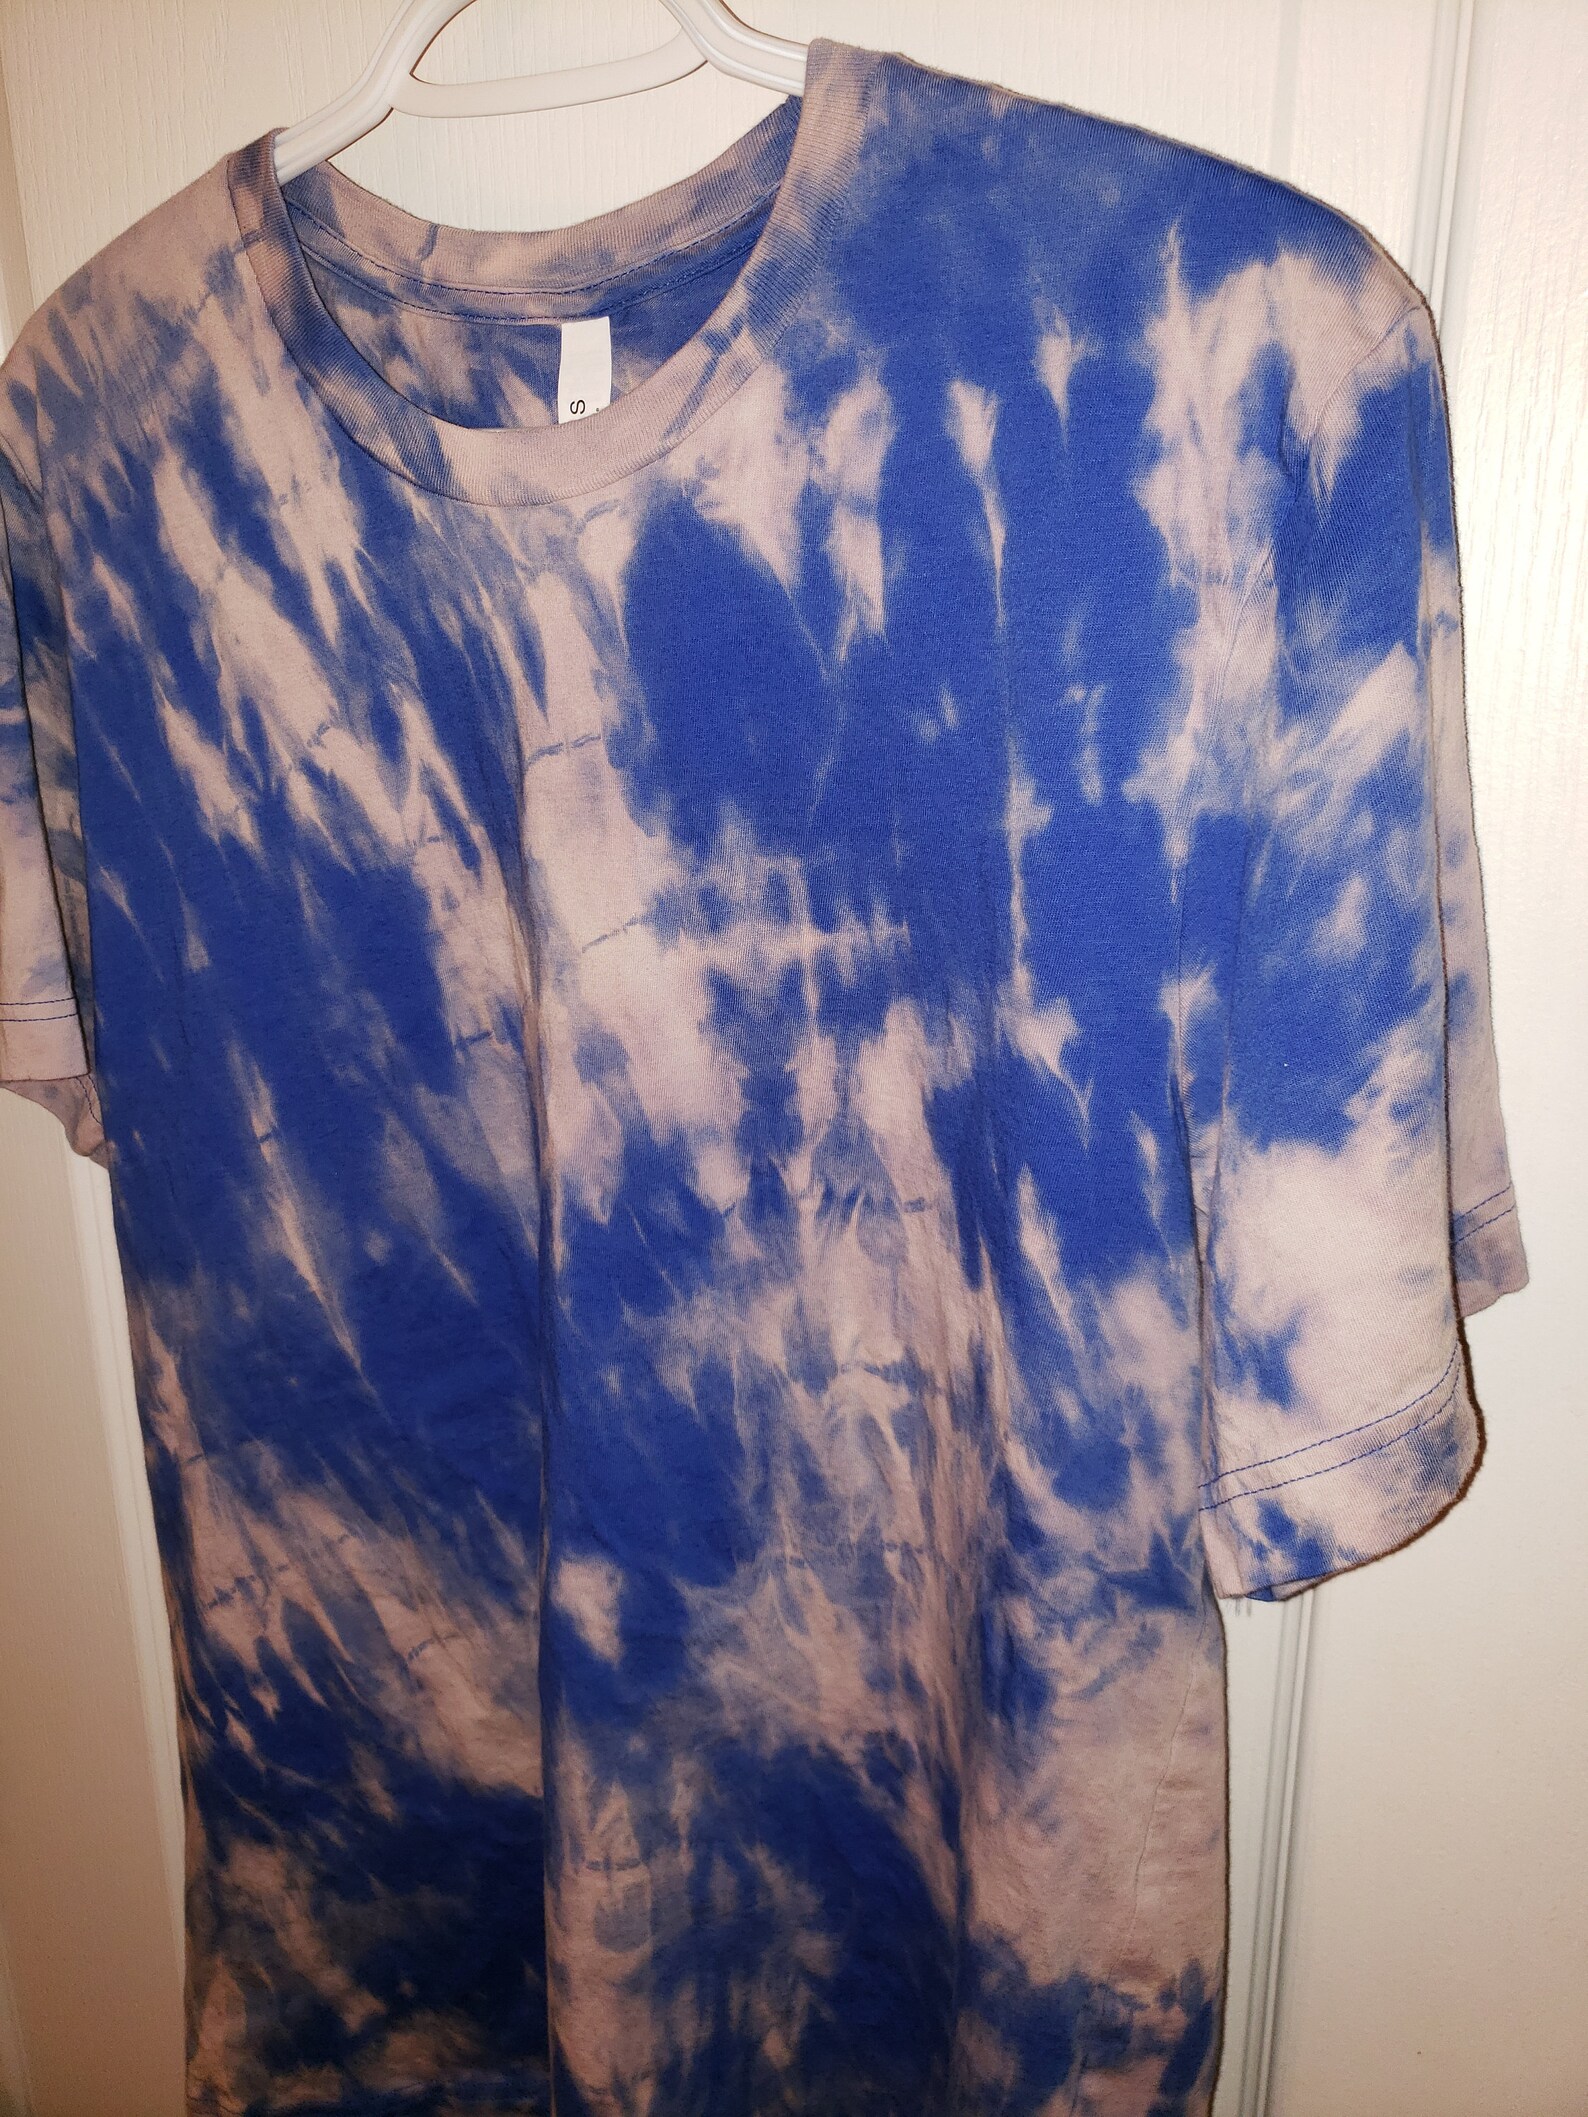 Crumble/Scrunched Bleached Soaked Tie Dye Large Unisex Blue | Etsy